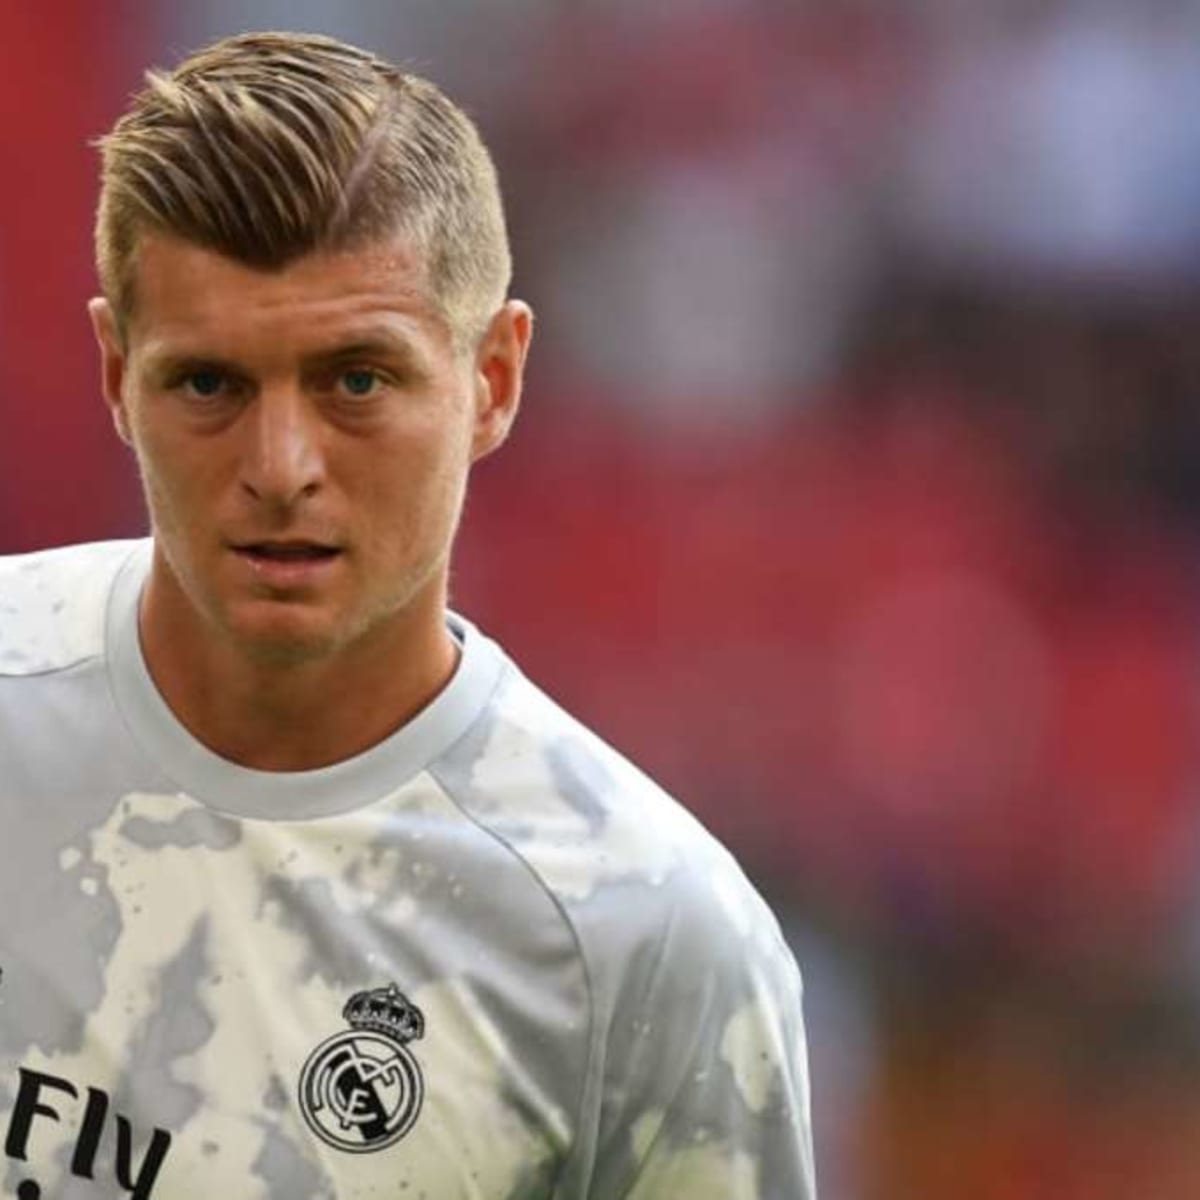 Toni Kroos Then And Now (Hairstyle & Body & Tattoos) - YouTube